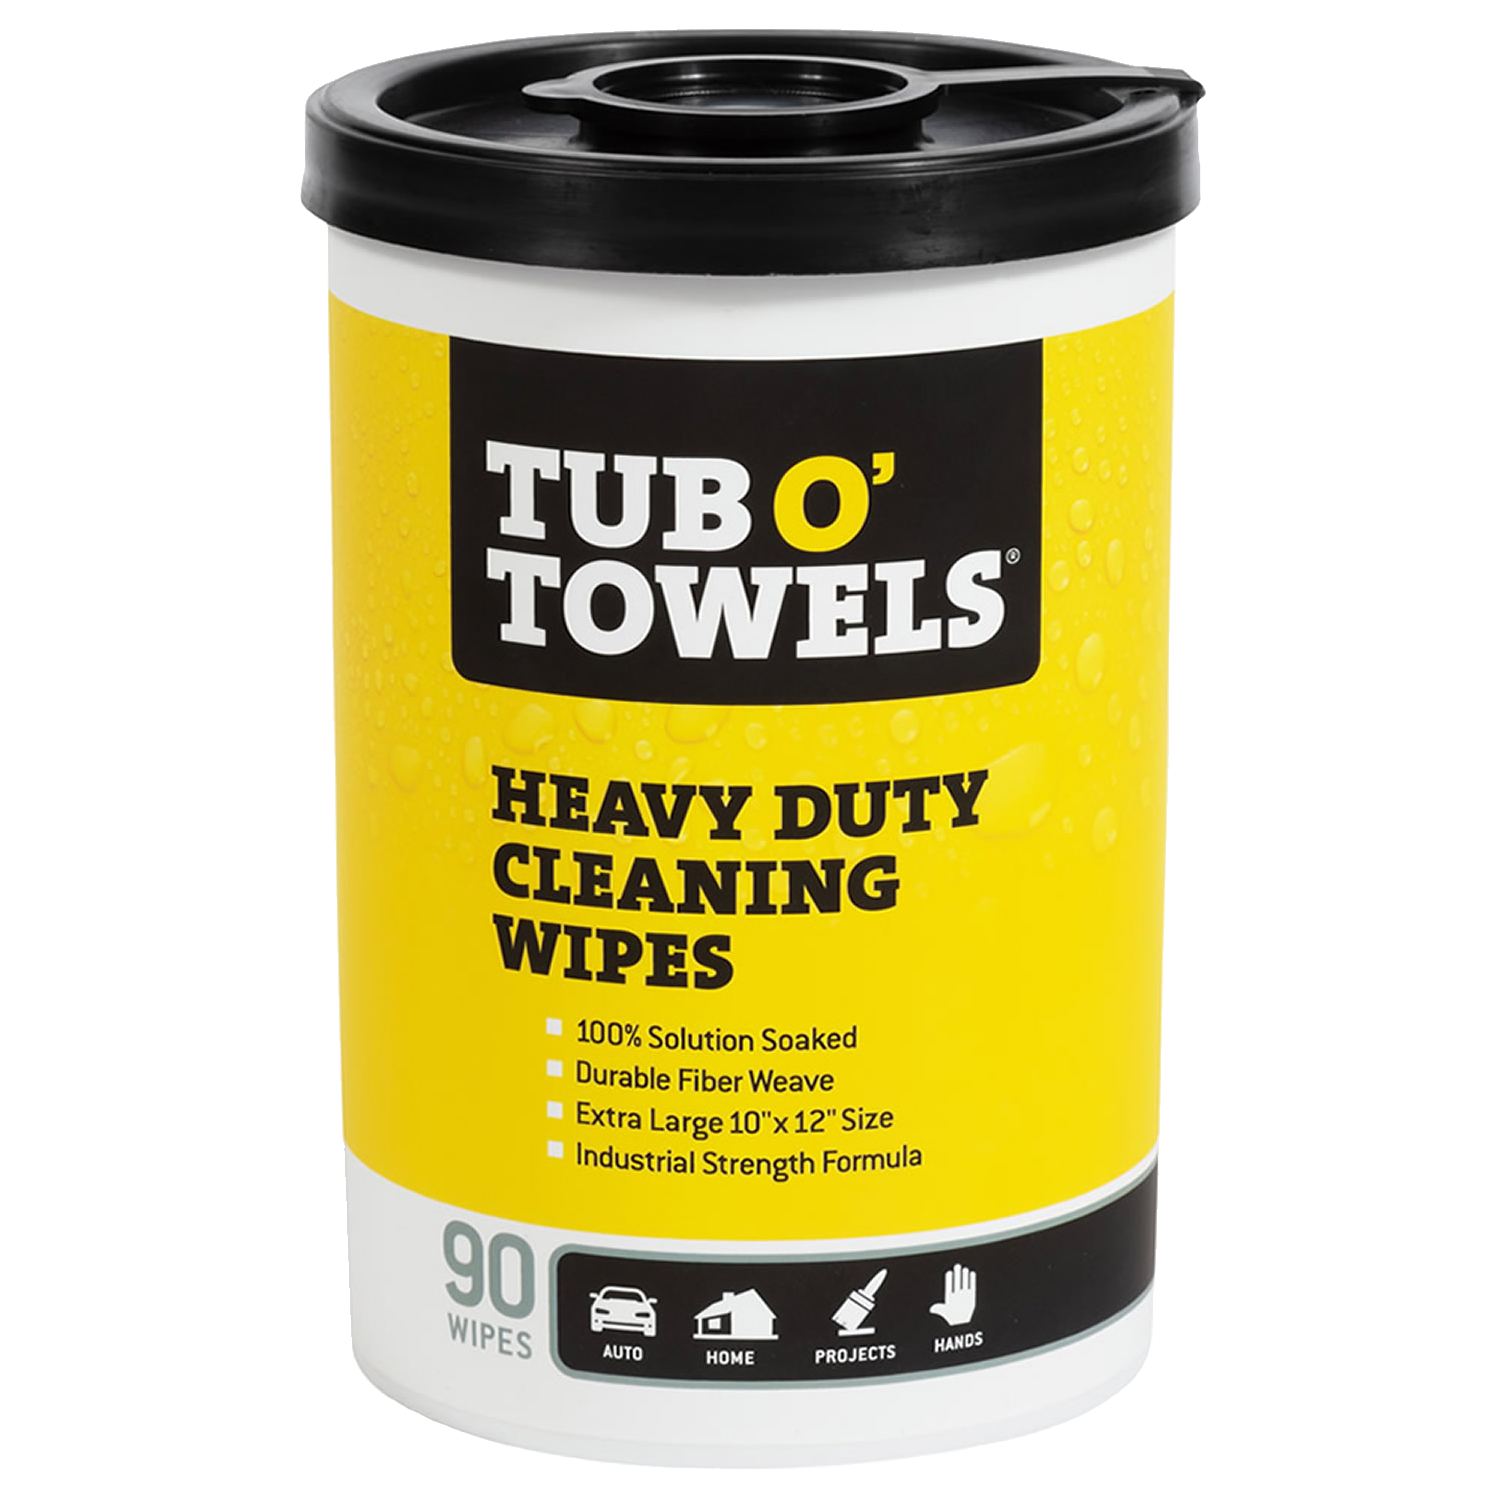 Tub O' Towels Cleaning Wipes for Your Auto, Equipment, Home & More